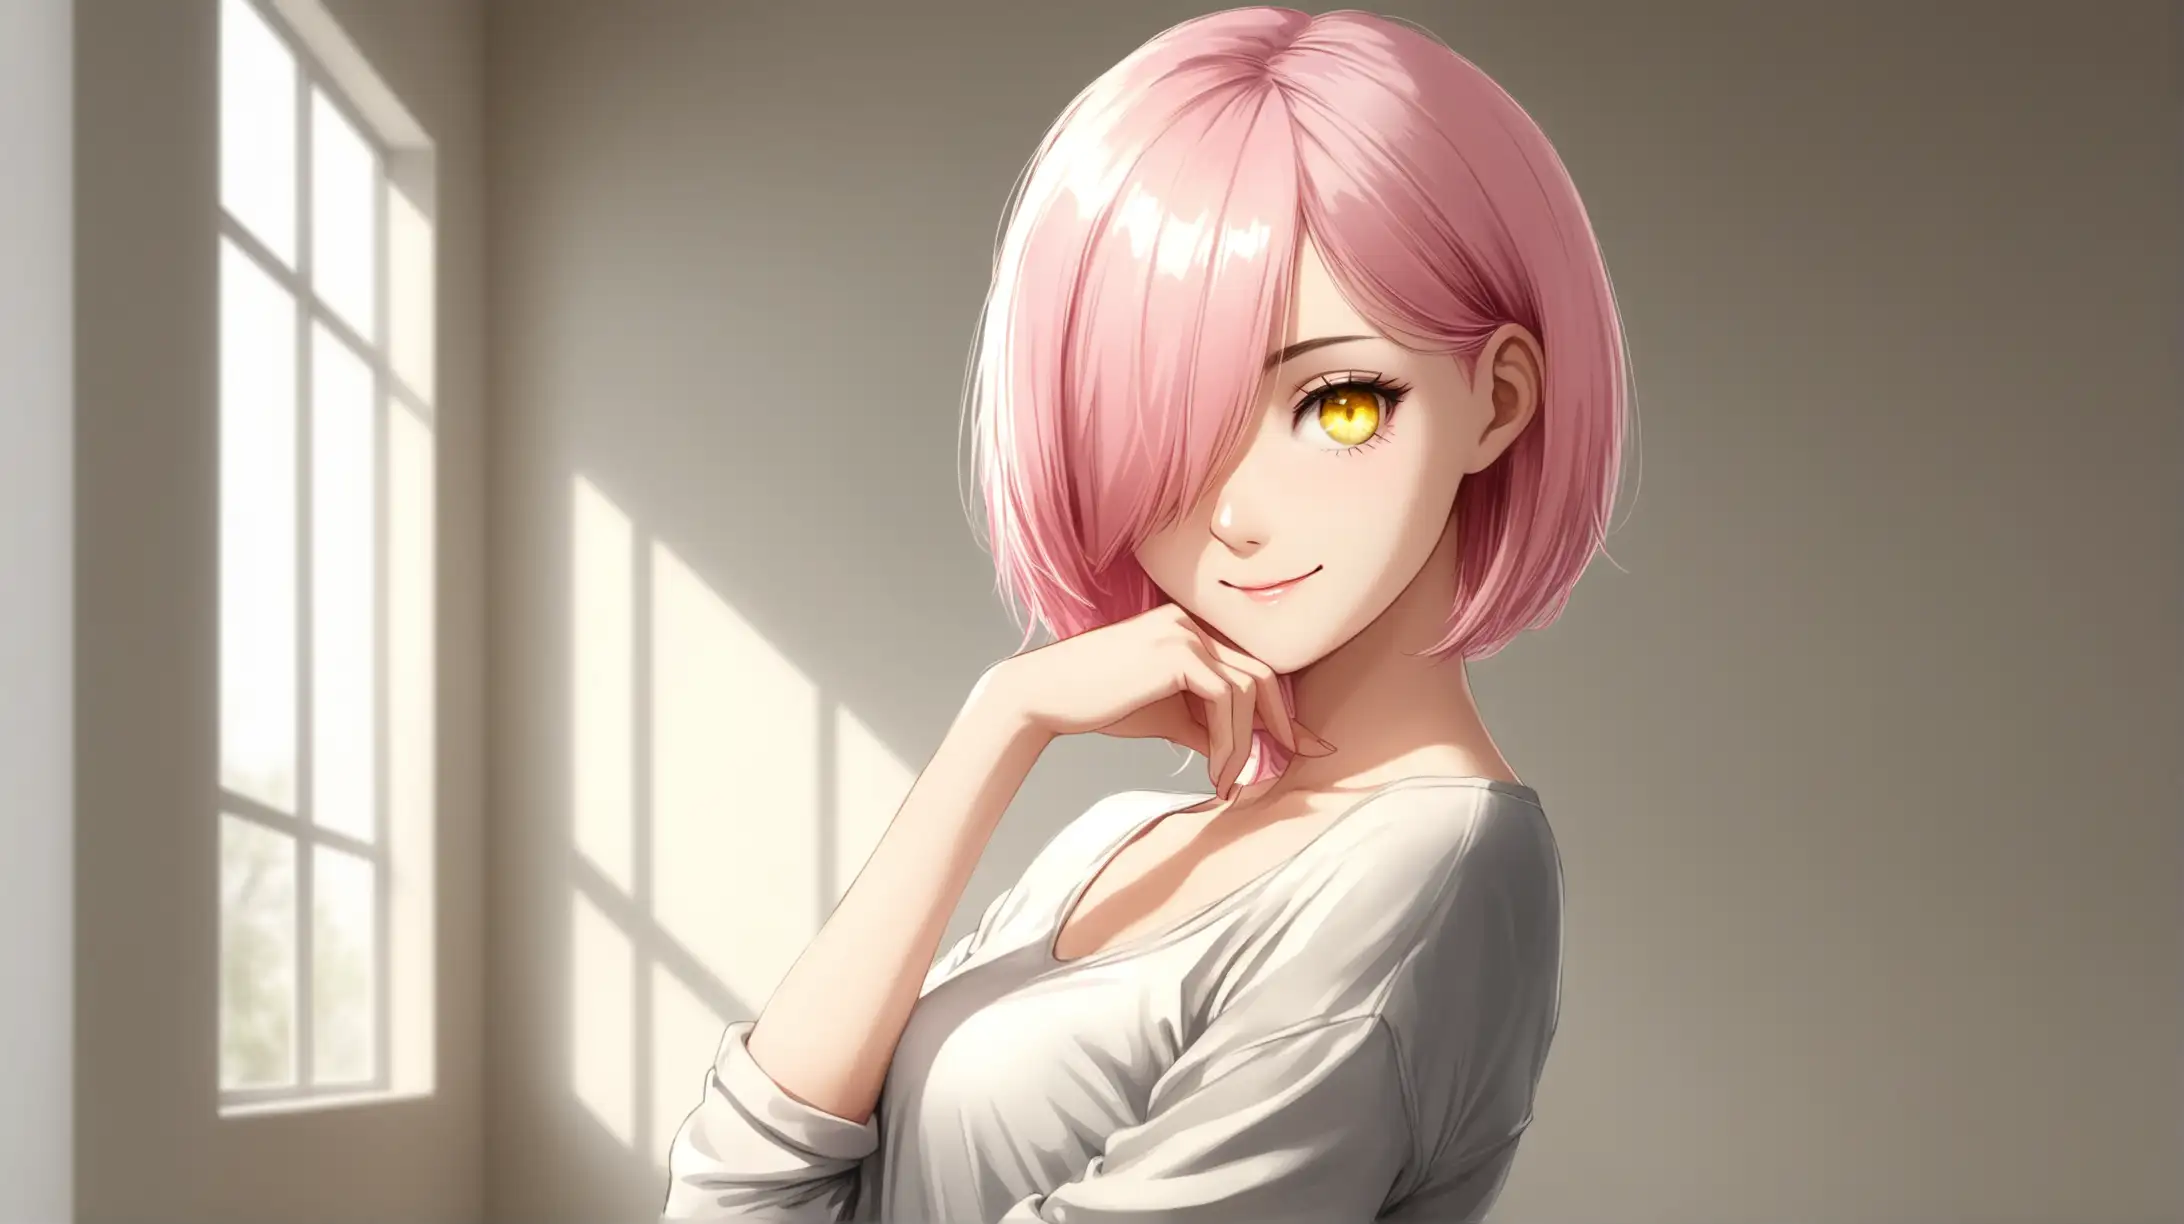 Seductive Young Woman with Pink Hair and Yellow Eyes Smiling Indoors